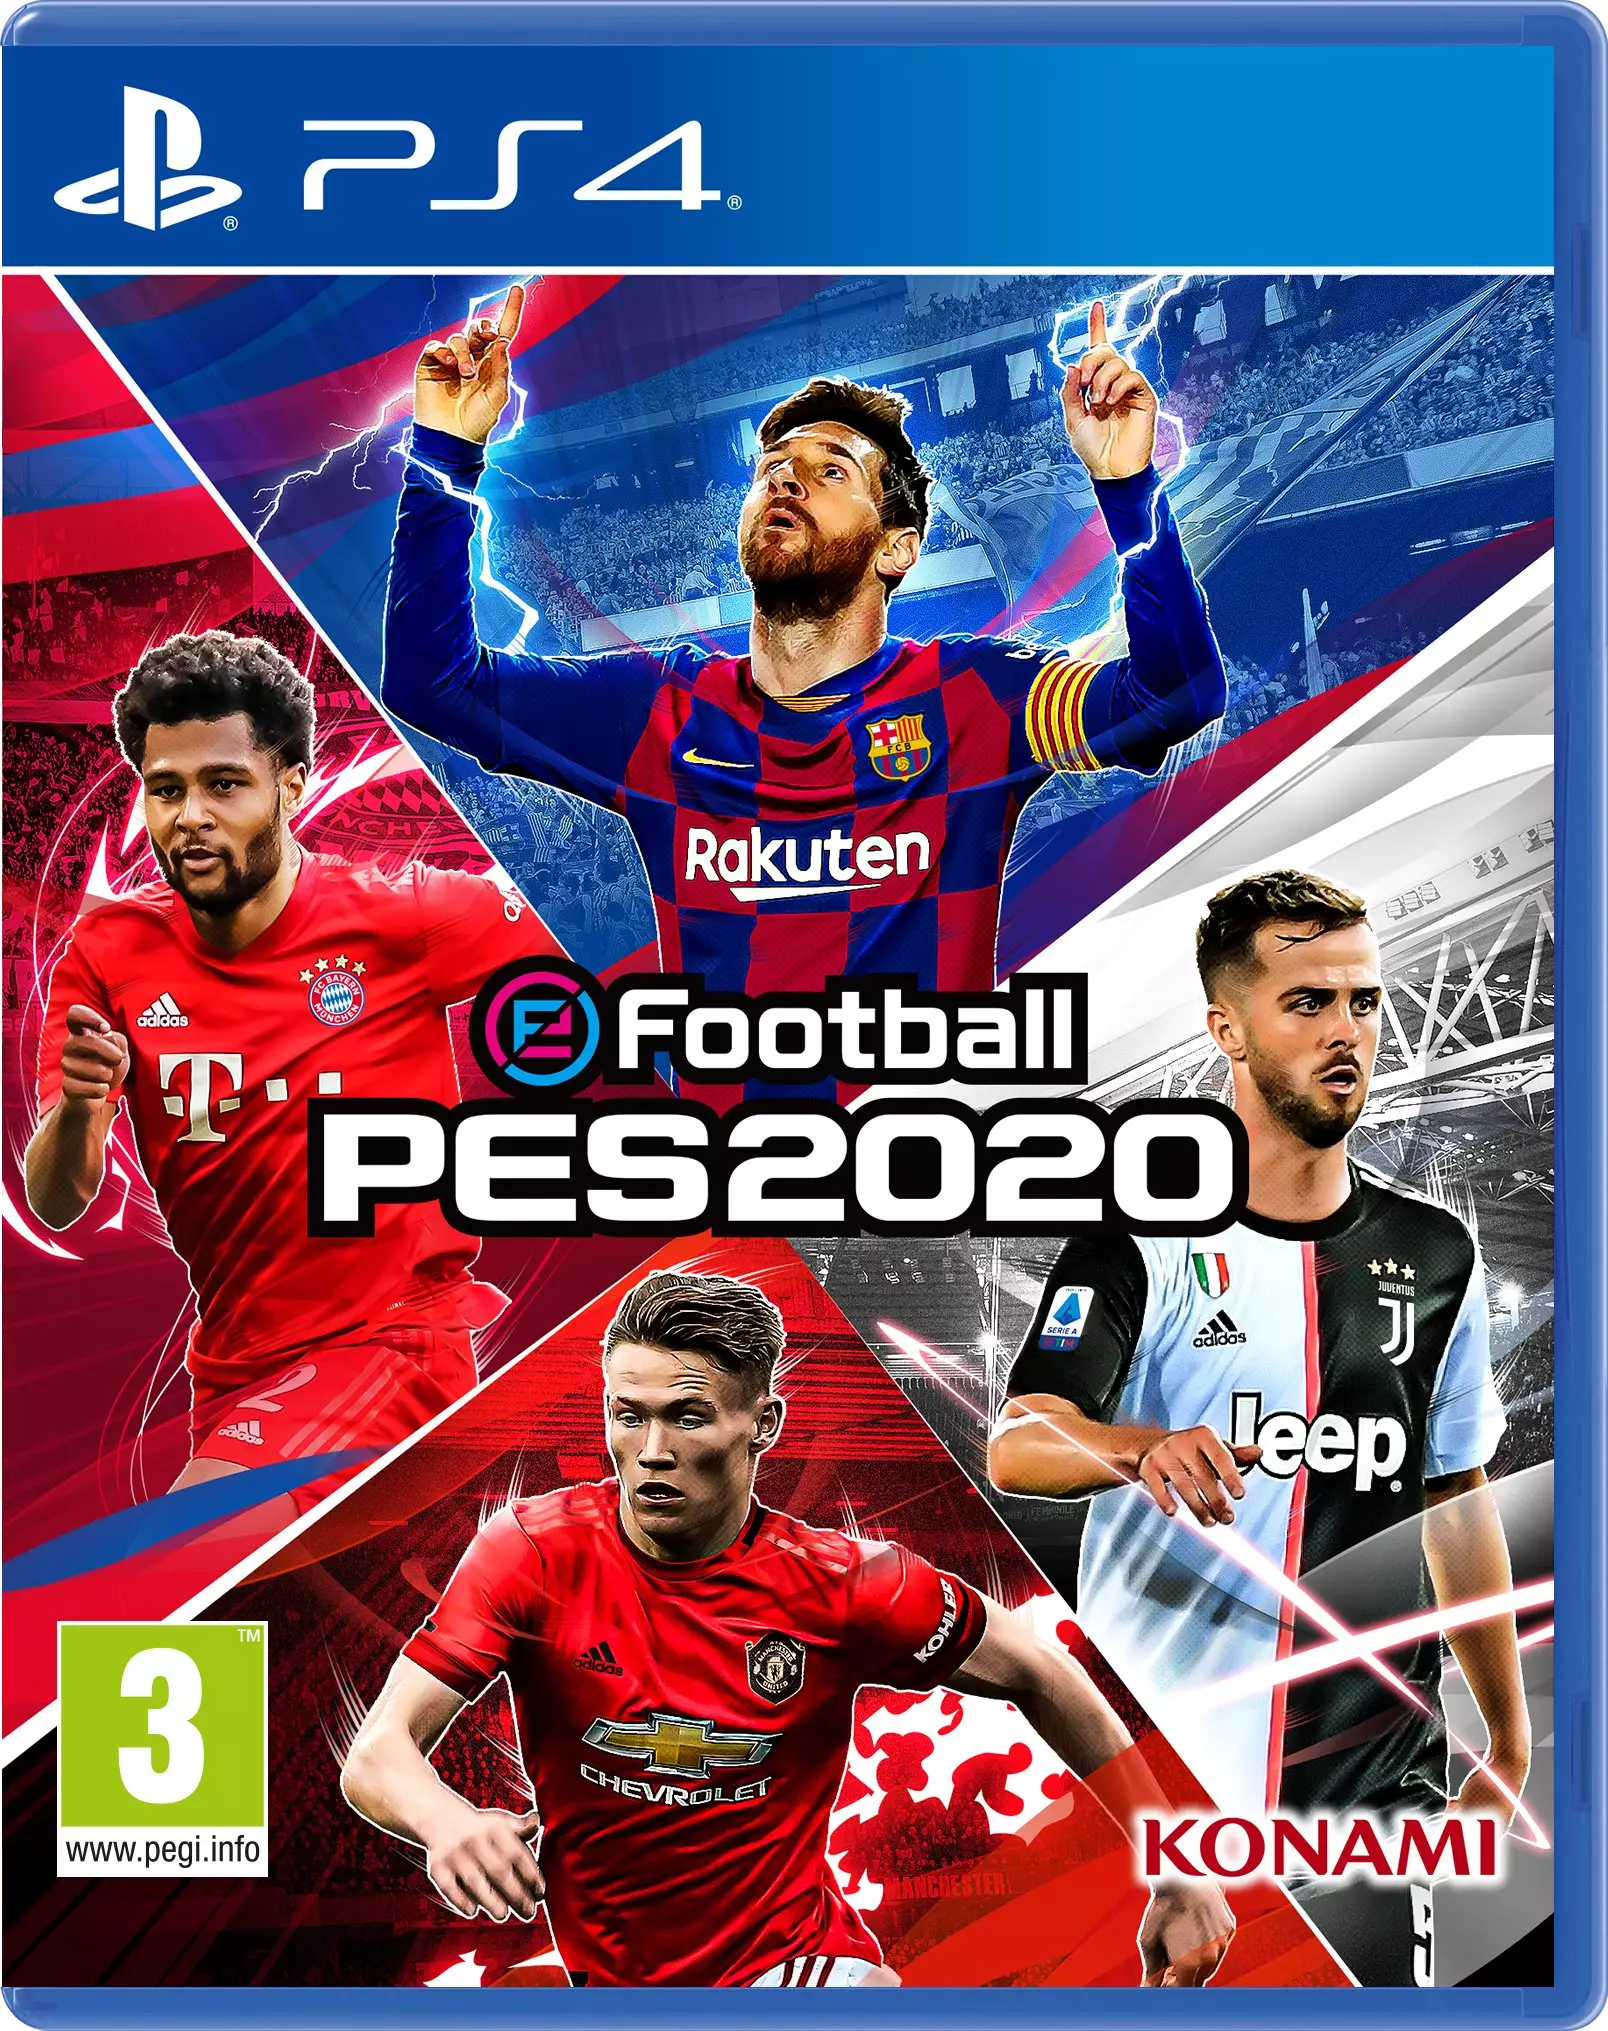 The new eFootball PES 2020 PS4 cover